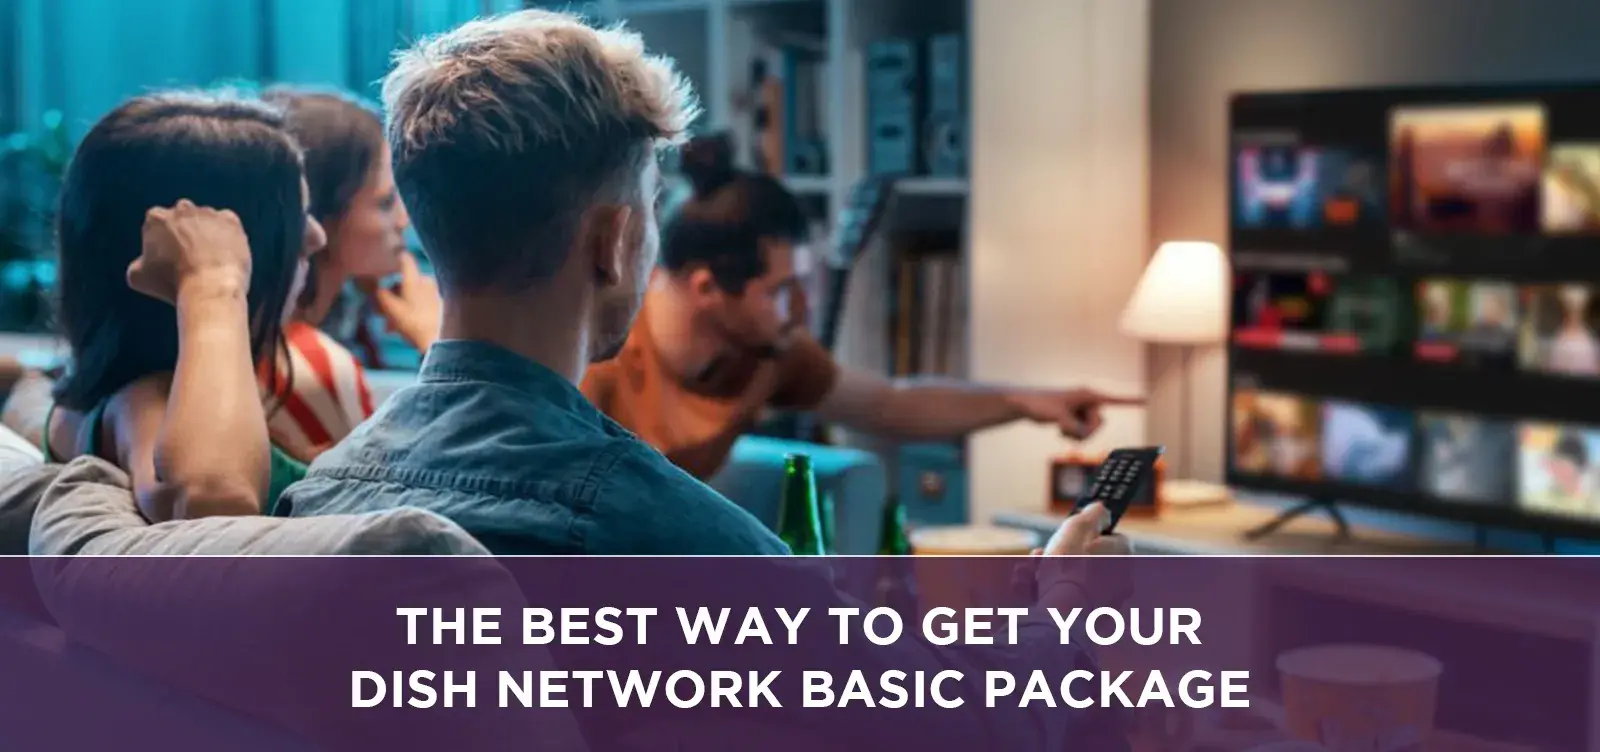 The Best Way to Get Your Dish Network Basic Package